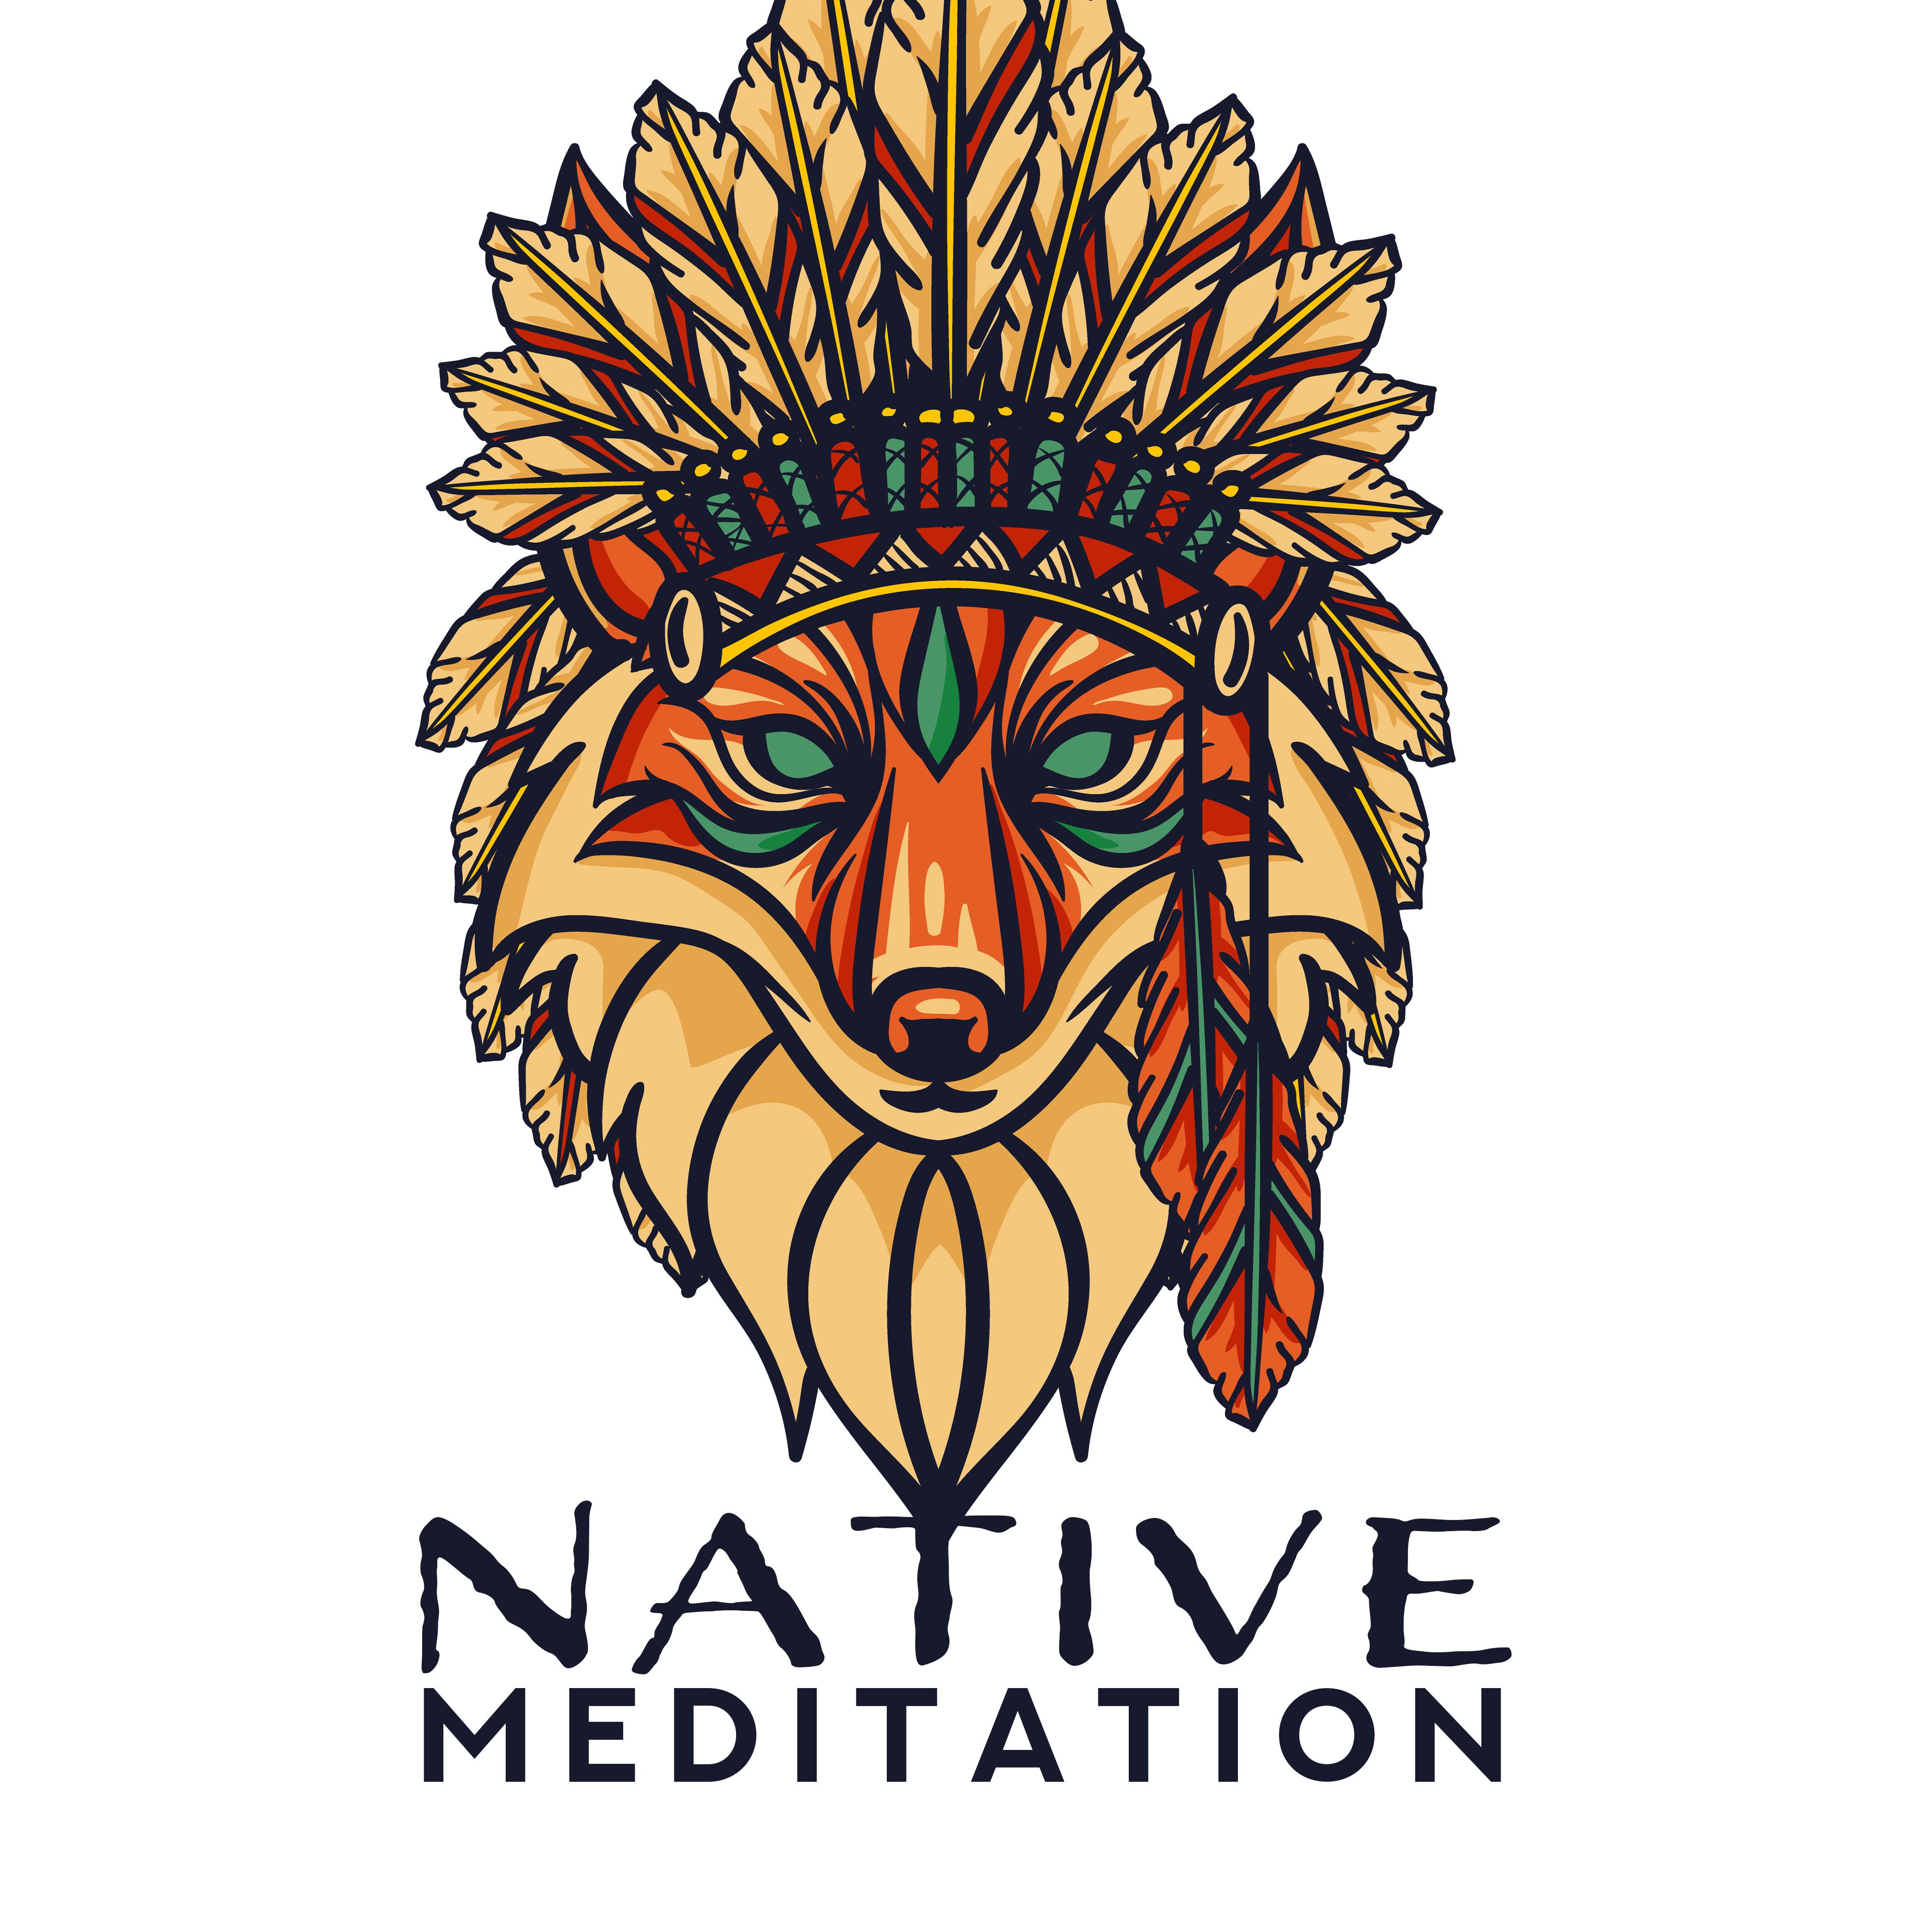 Native Meditation: Spiritual Music for Meditation and Contemplation, Beautiful Sounds of Nature, Harmony with Each Other and Nature